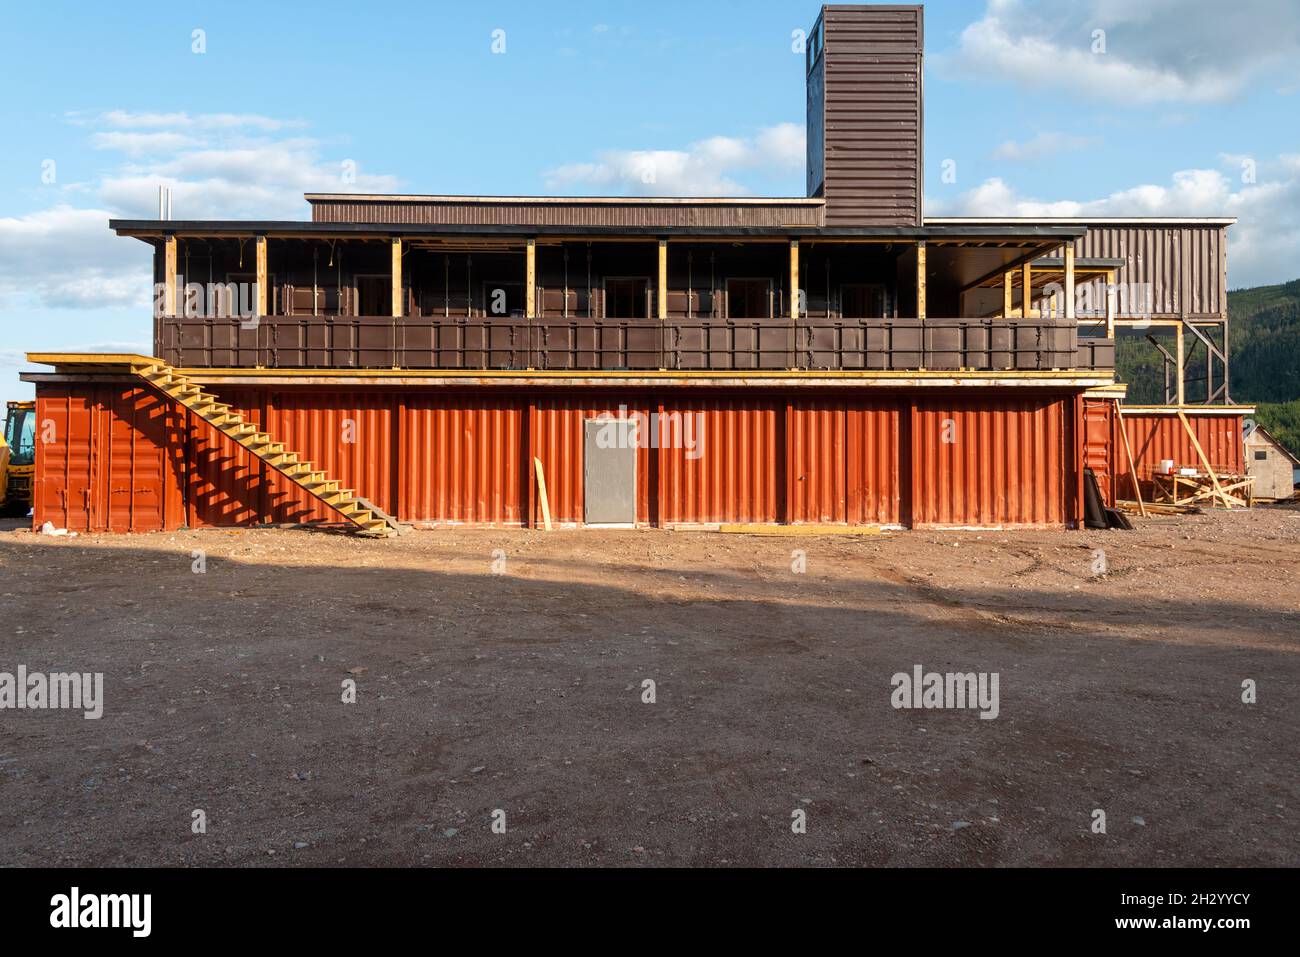 Newfoundland, Canada-October 2021: The exterior construction of a hotel using shipping containers as modular construction. Recycled brown and orange m Stock Photo